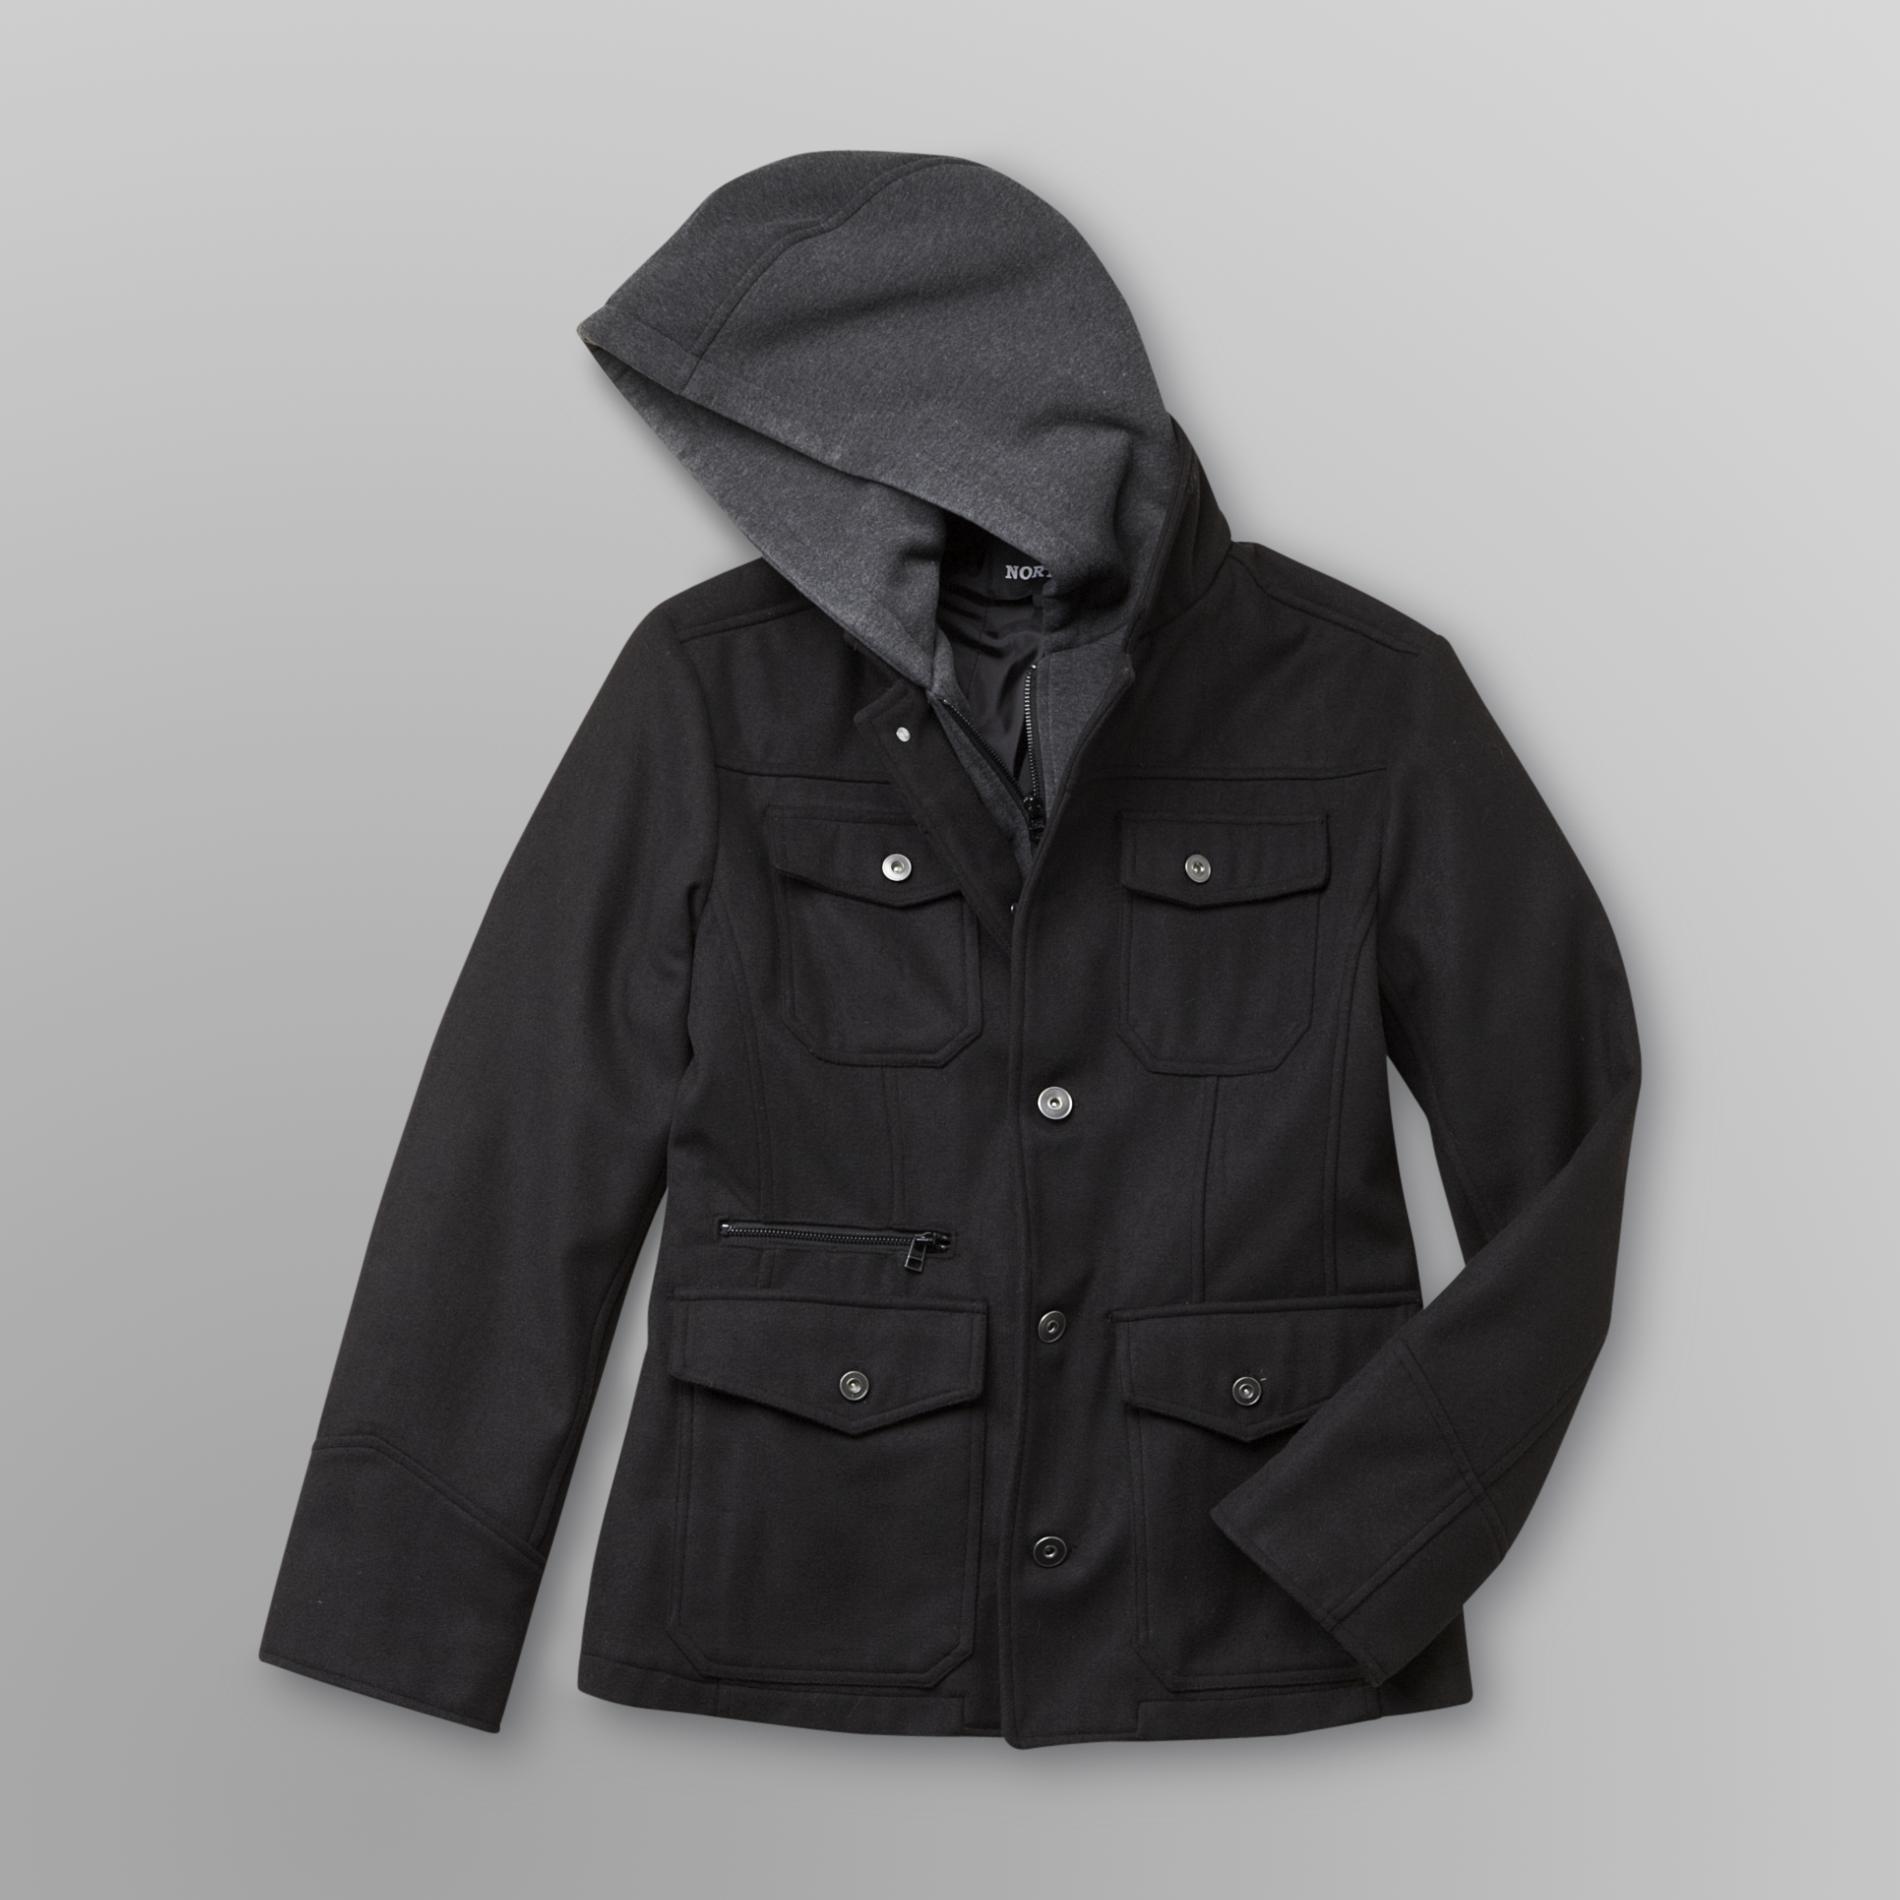 North Zone Hooded Winter Jacket